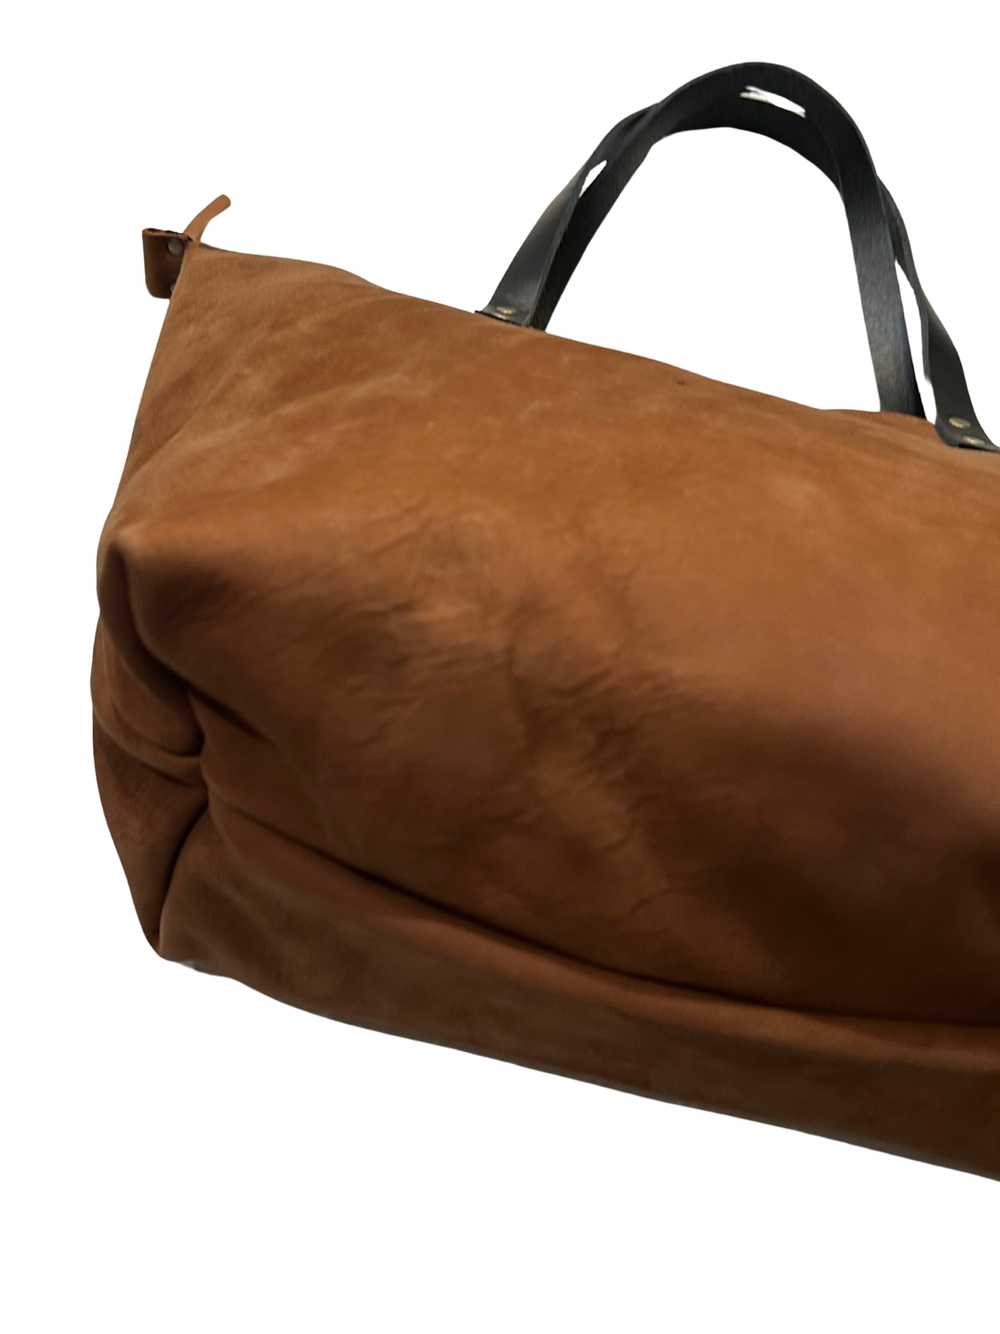 Portland Leather 'Almost Perfect' Leather Tote Bag - image 3